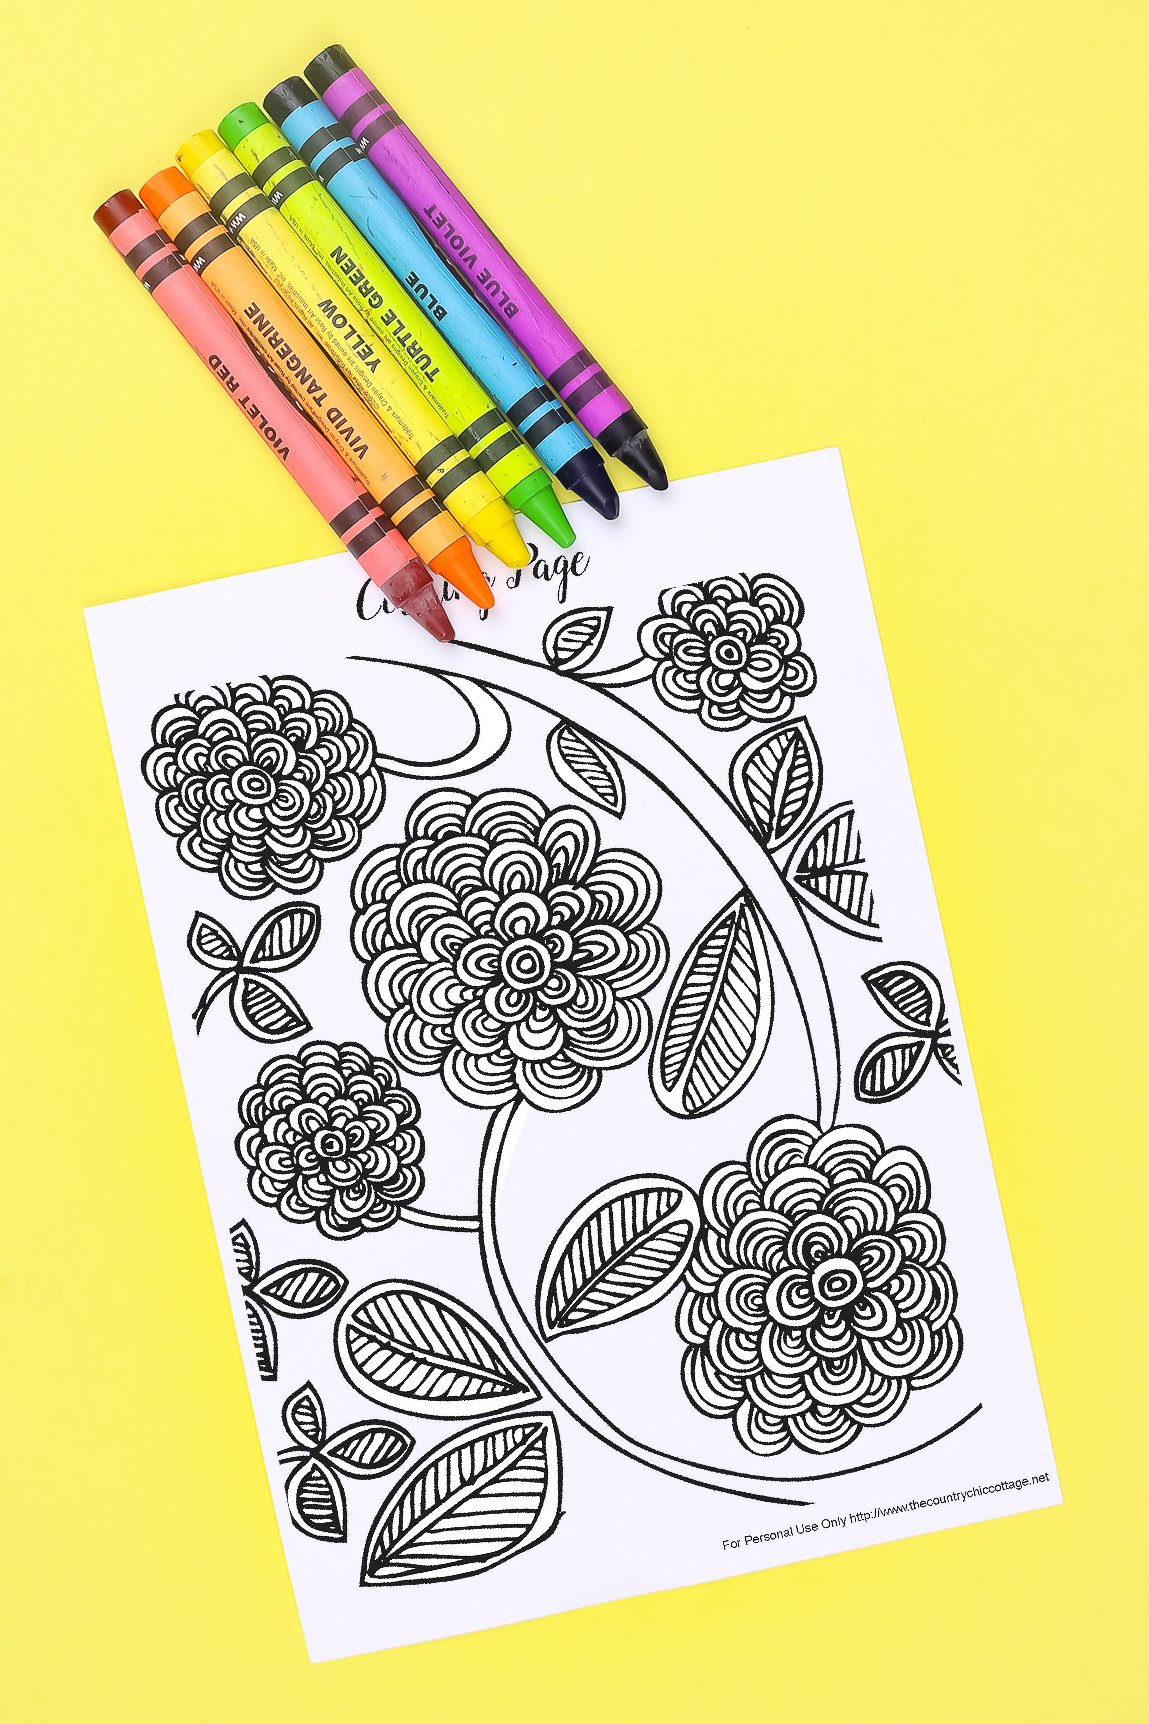 Adult Coloring Books to Buy - Angie Holden The Country Chic Cottage